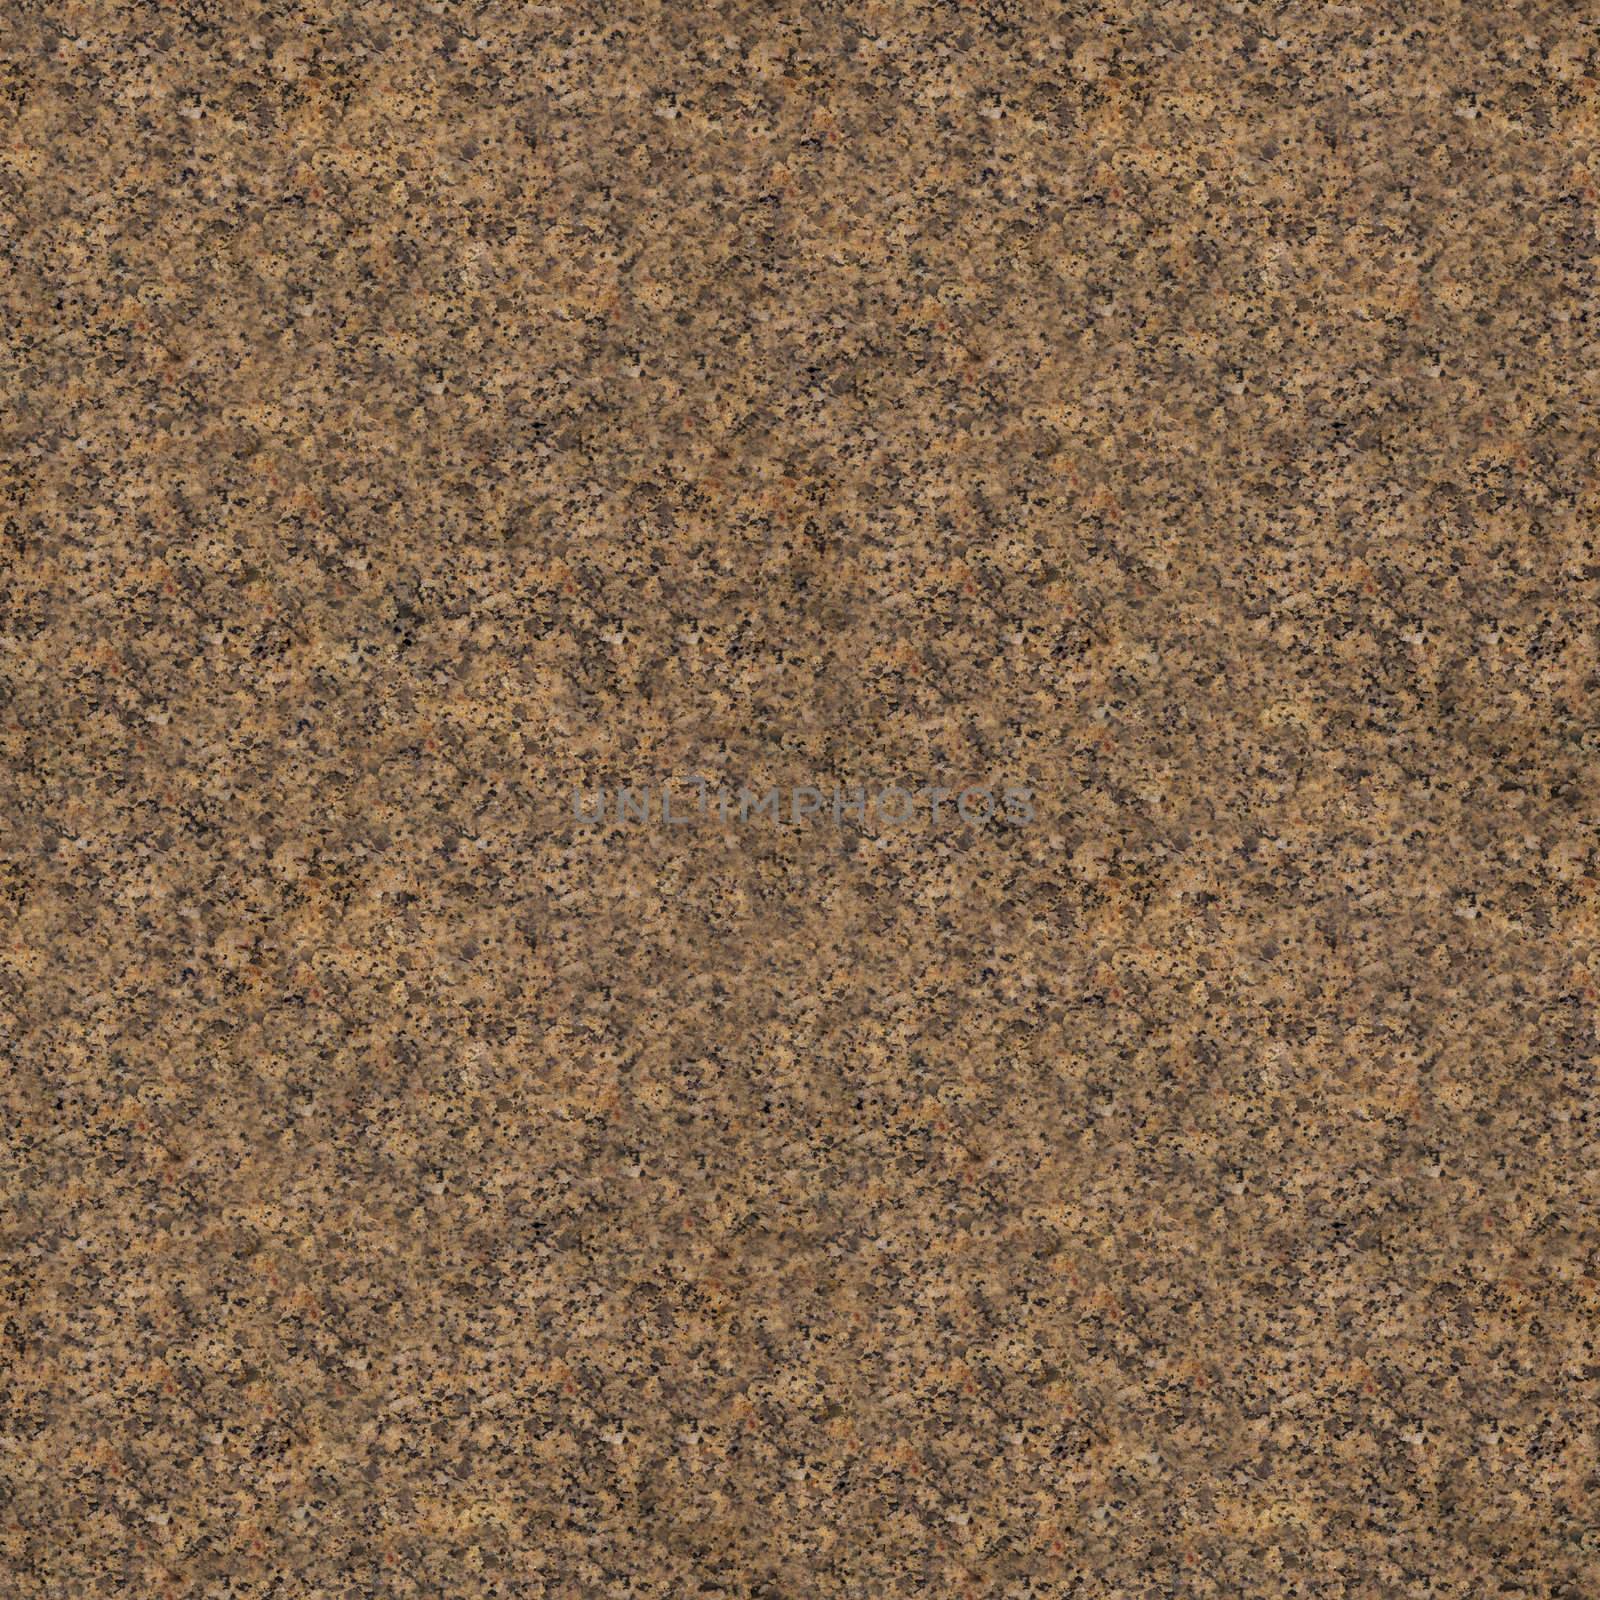 Tiling brown and black granite texture or background.